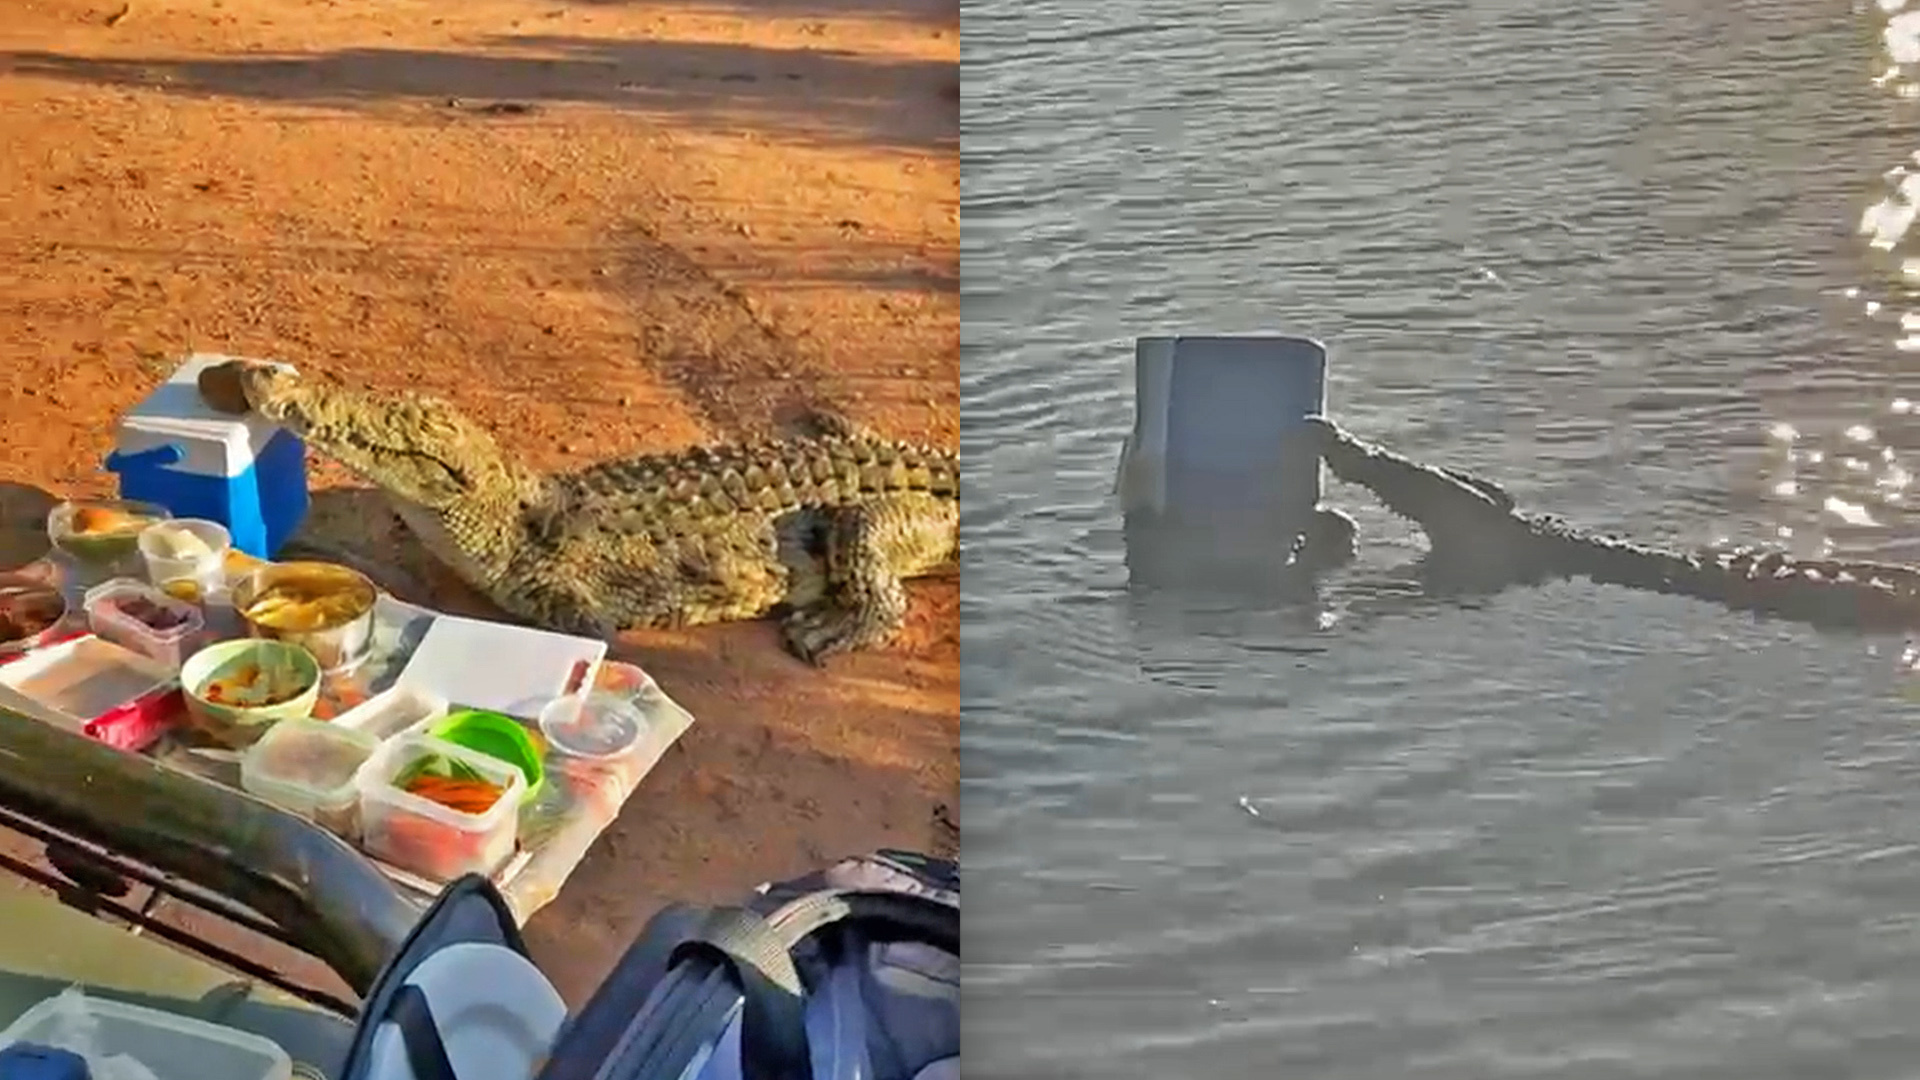 Crocodile Joins Picnic and Steals Cooler Box